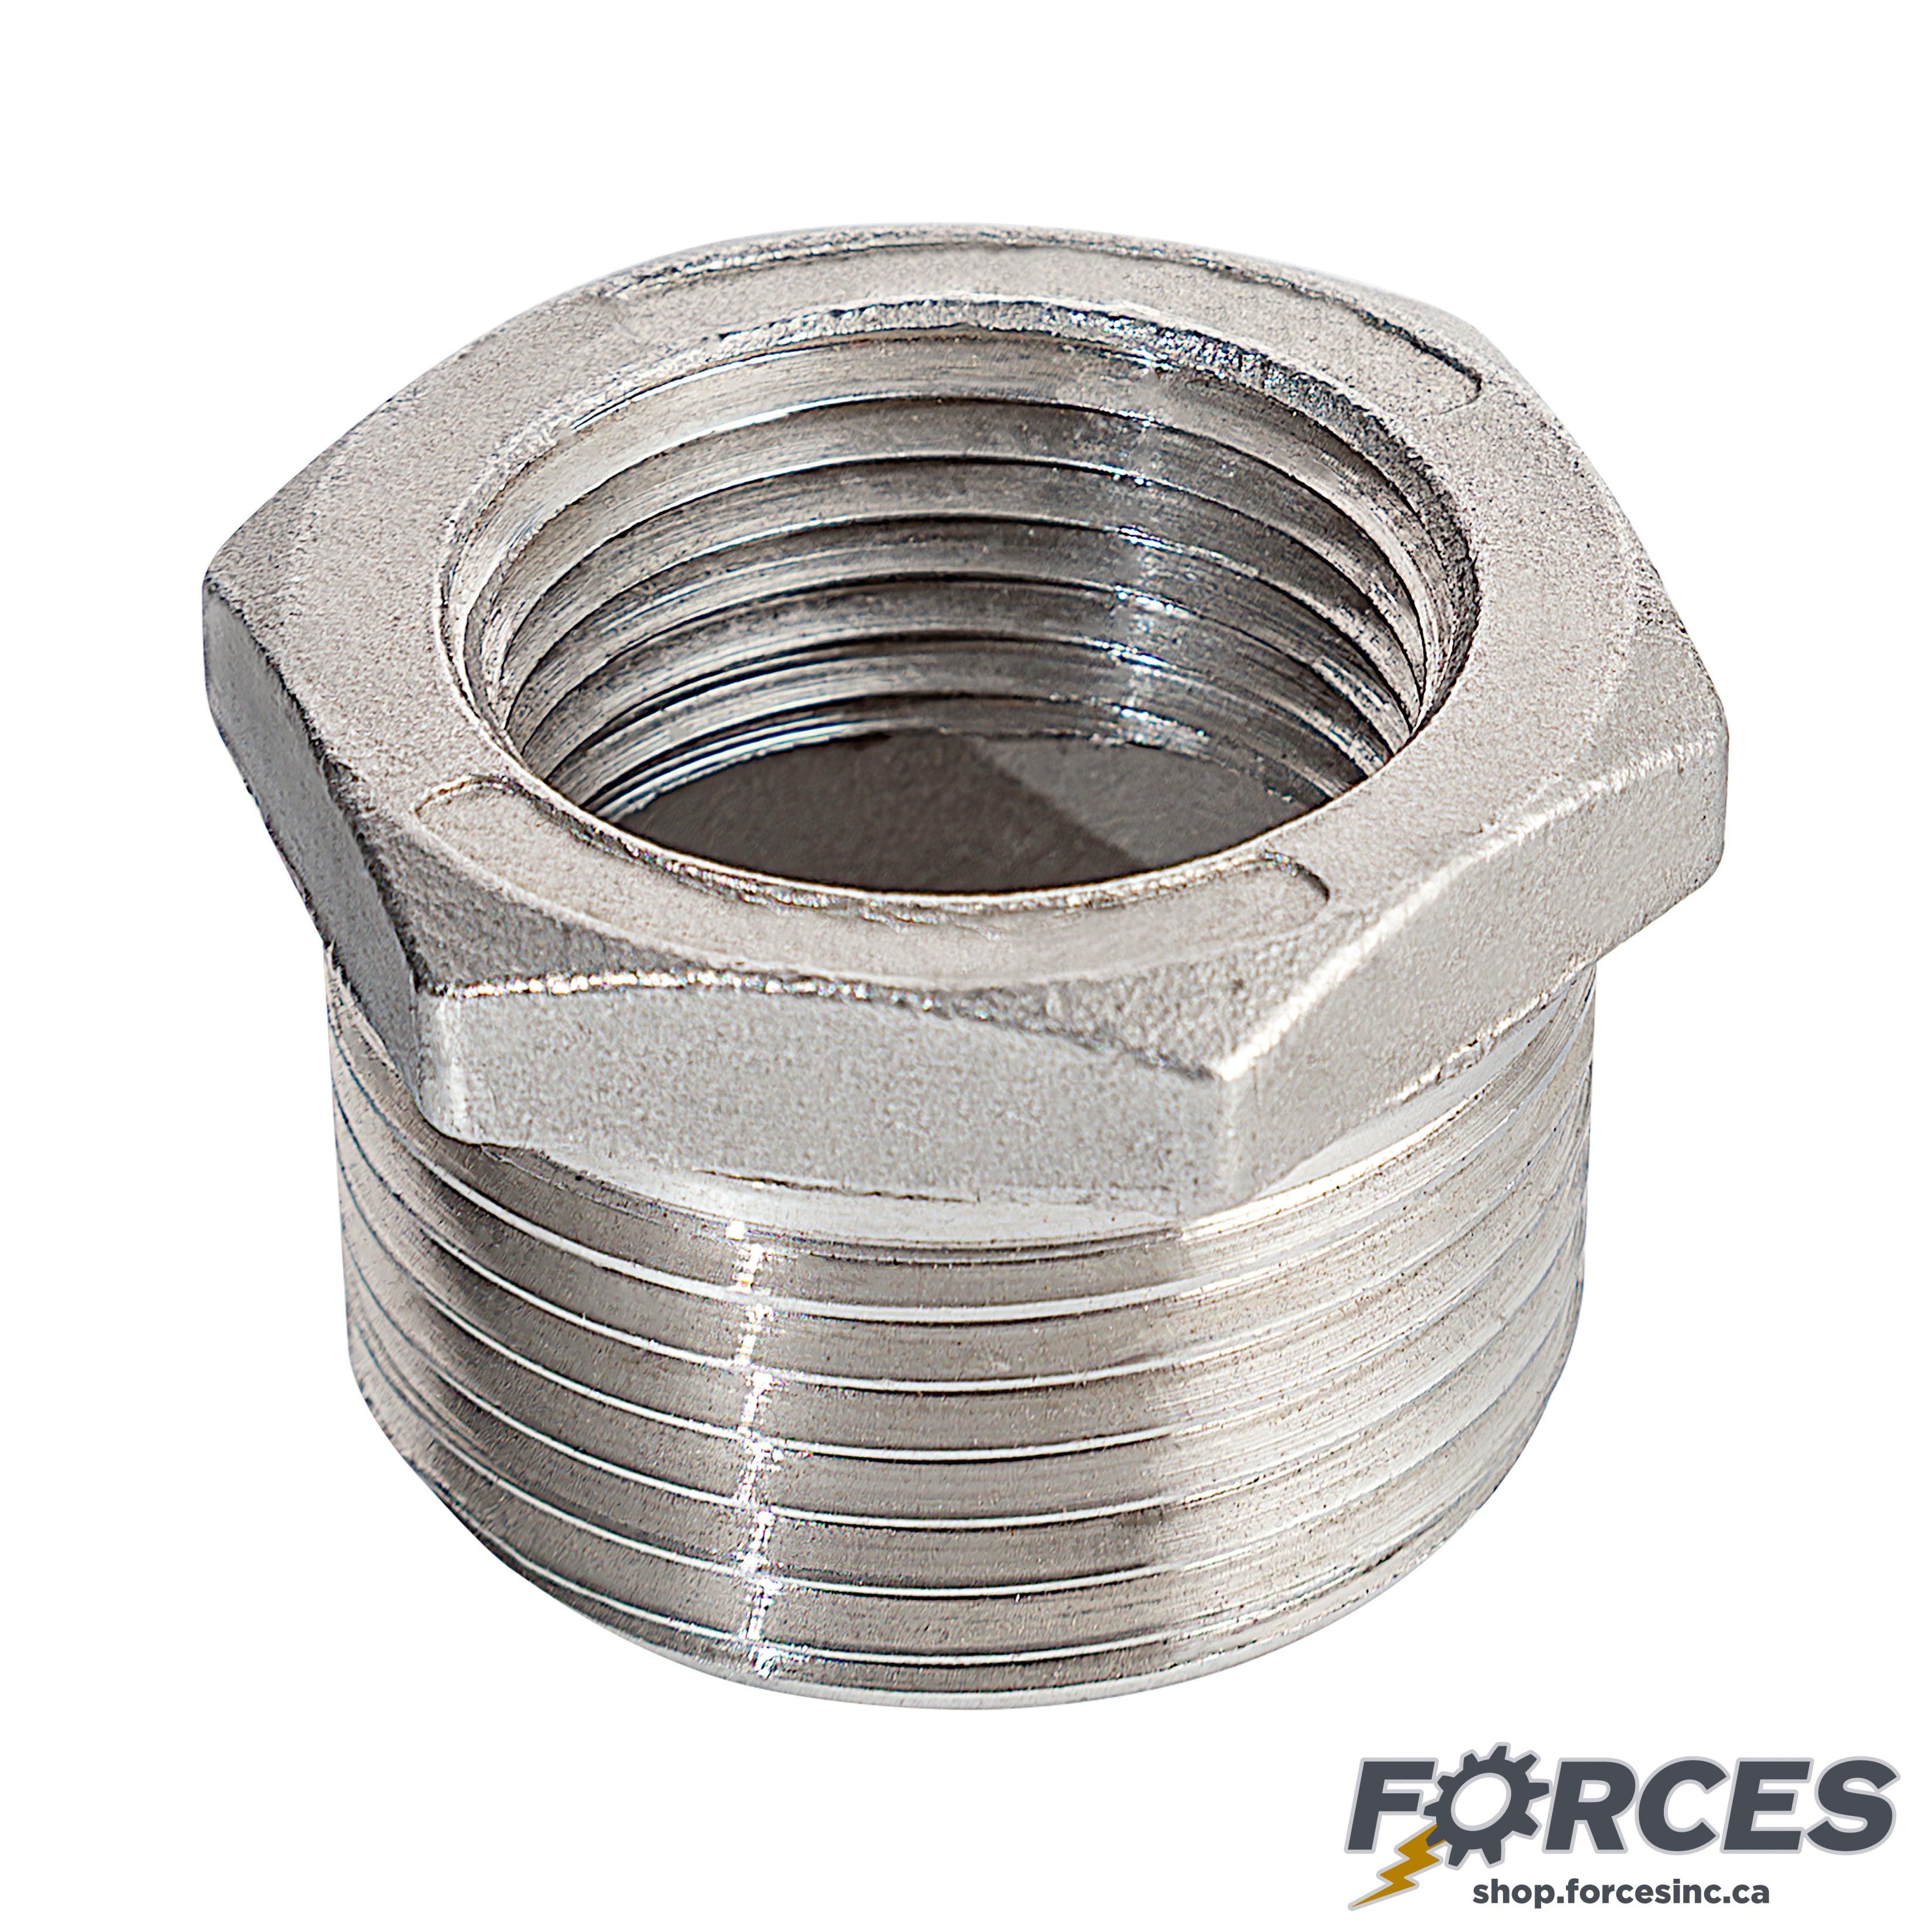 2-1/2" (M) x 1" (F) Reducing Hex Bushing NPT #150 - Stainless Steel 316 - Forces Inc